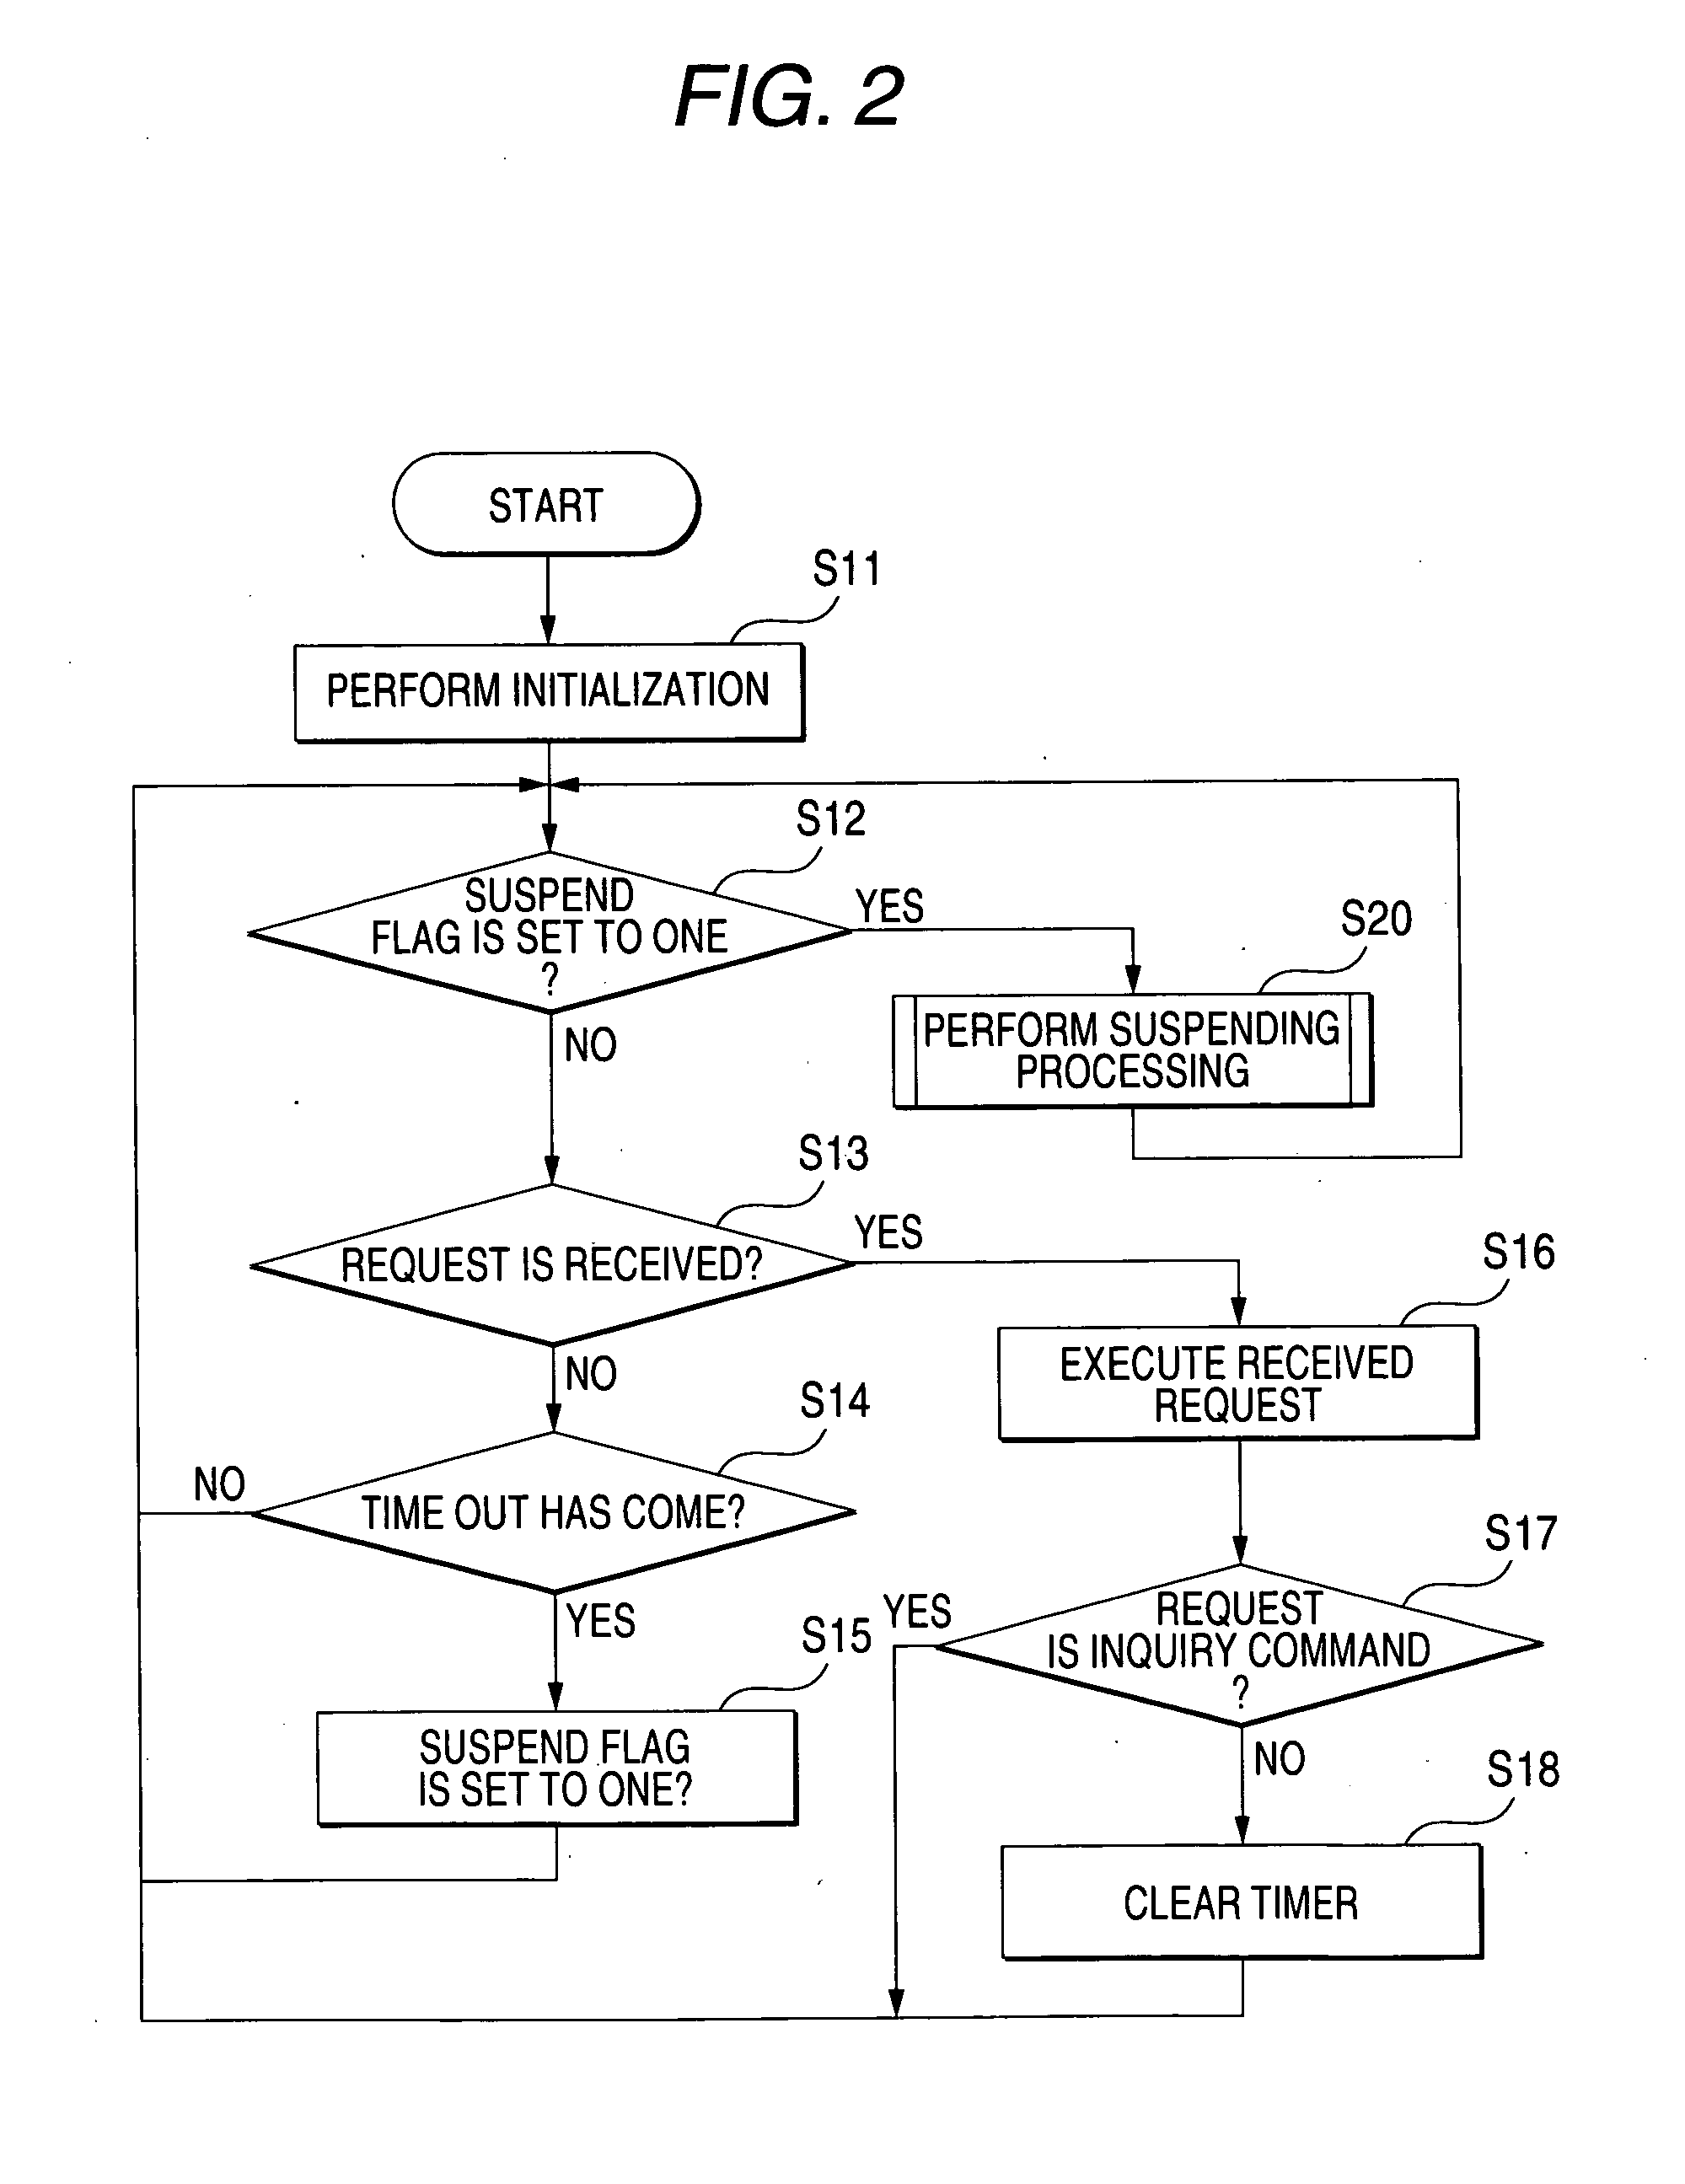 Host apparatus and information processing system using the same